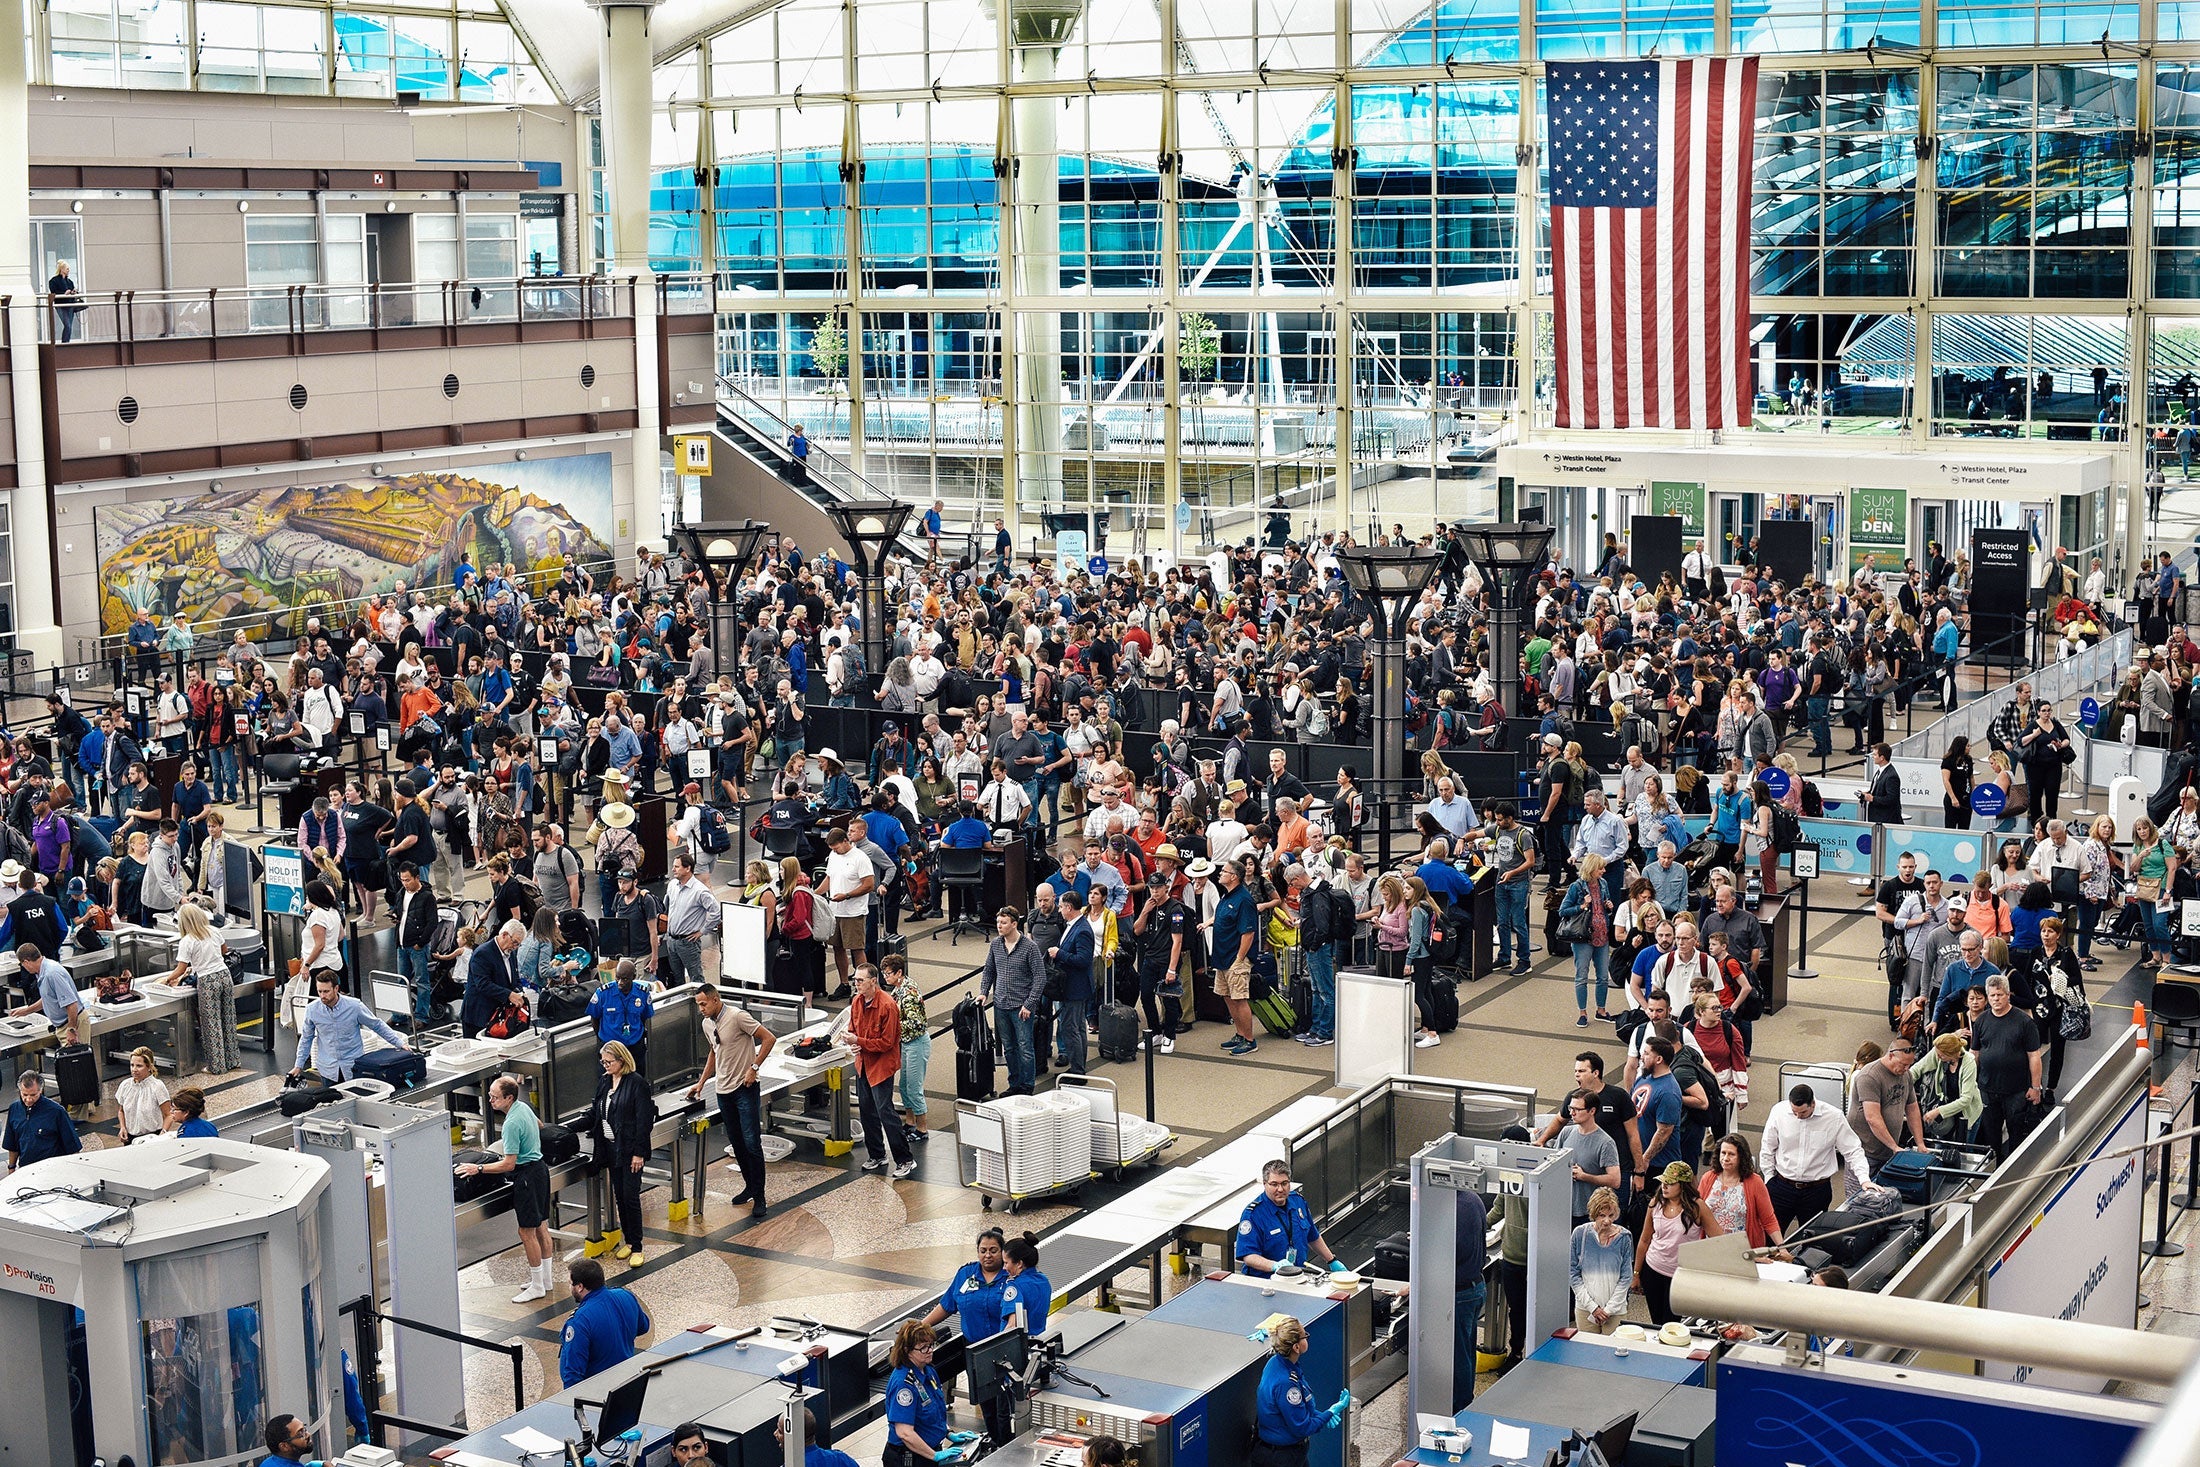 A long line of passengers wait to enter security screening at an airport.